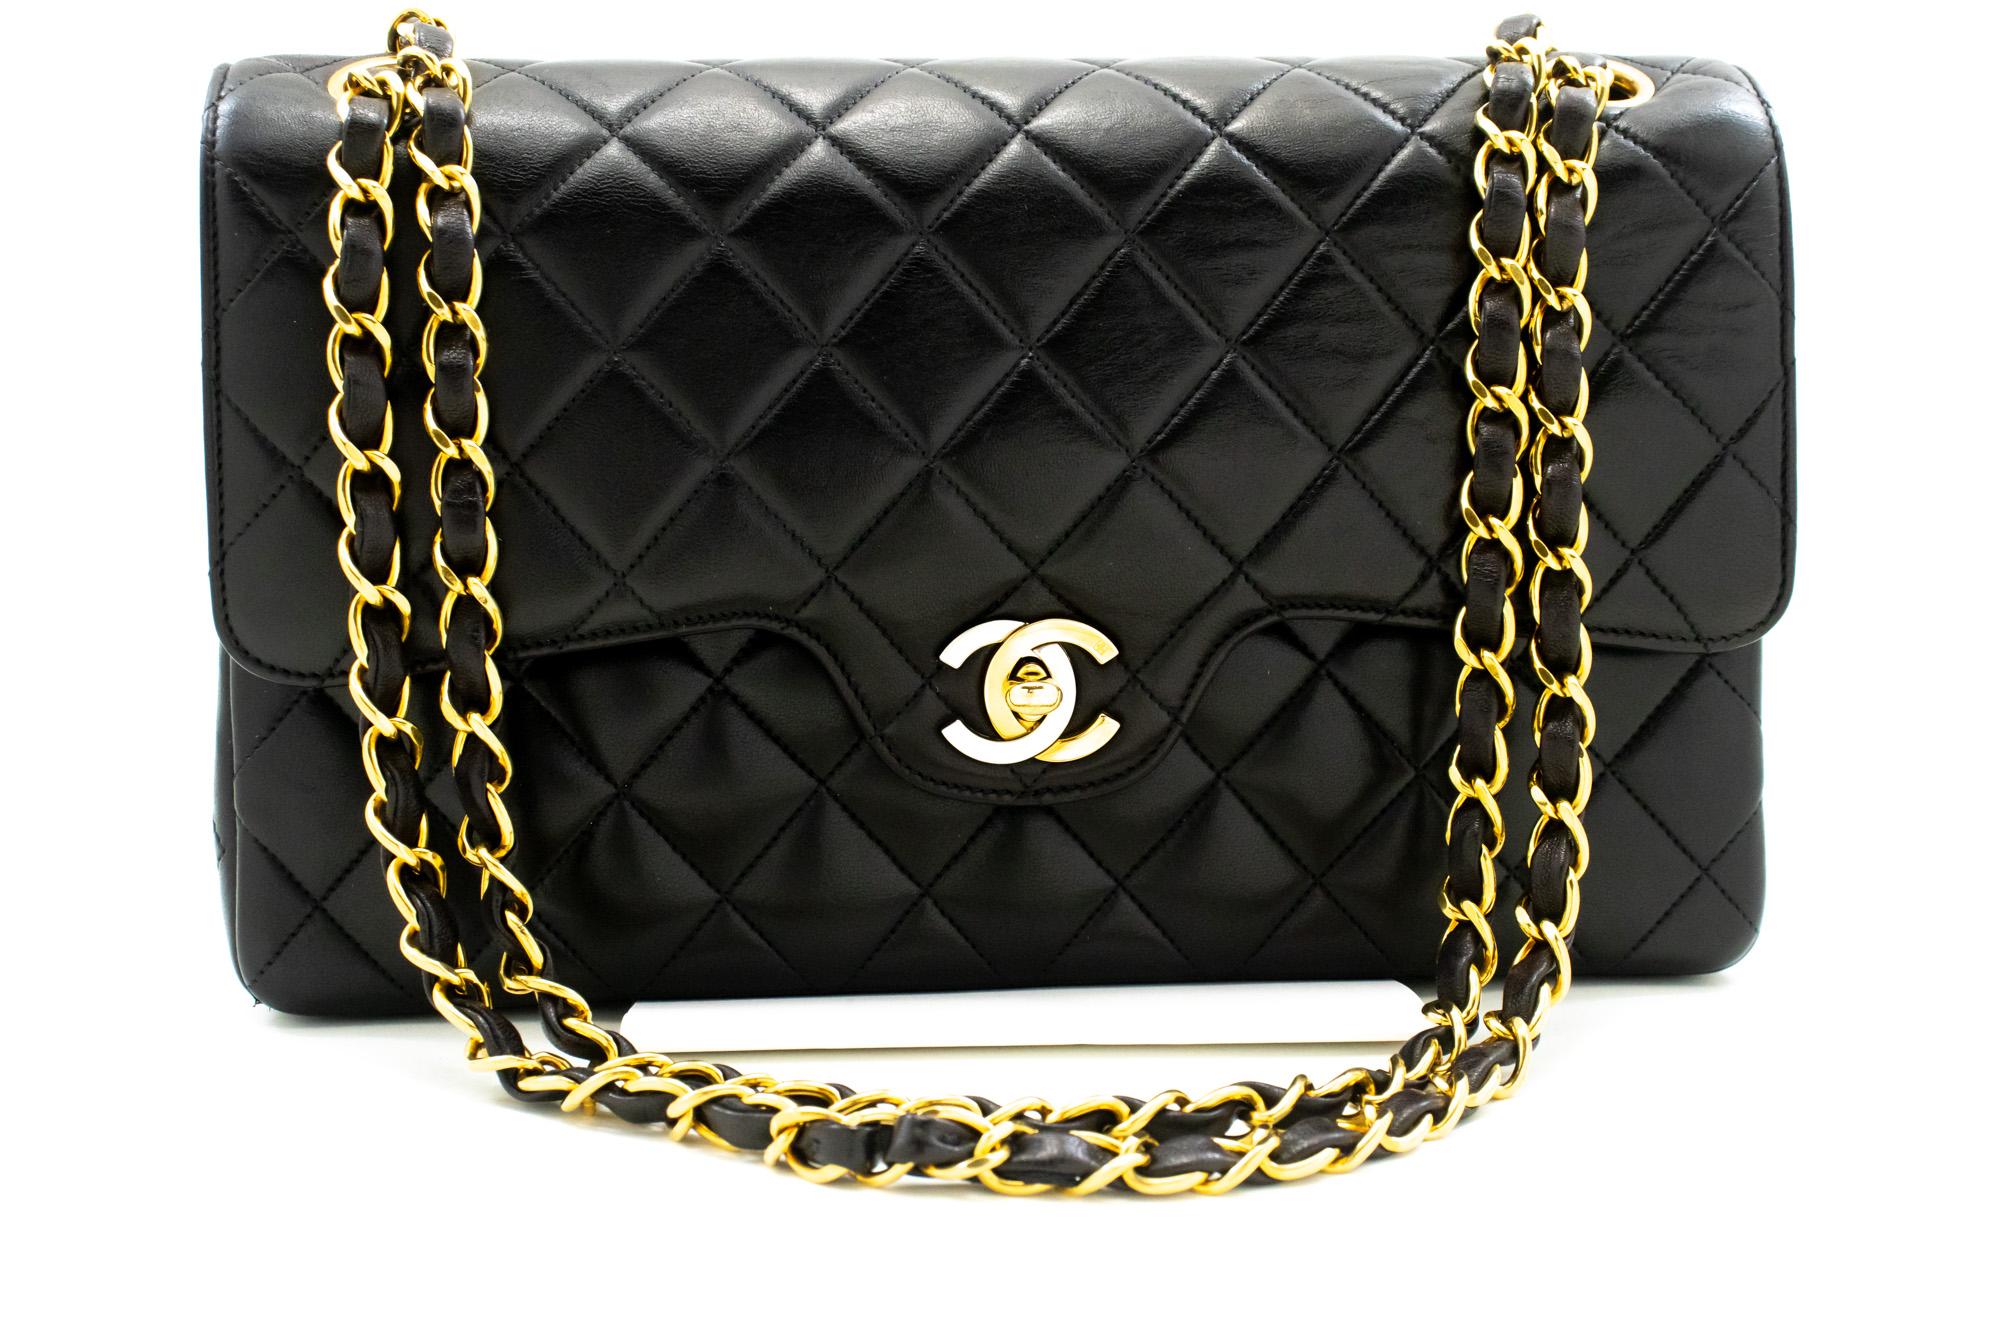 An authentic CHANEL Paris Limited Chain Shoulder Bag Black Double Flap Quilted. The color is Black. The outside material is Leather. The pattern is Solid. This item is Vintage / Classic. The year of manufacture would be 1991-1994.
Conditions &